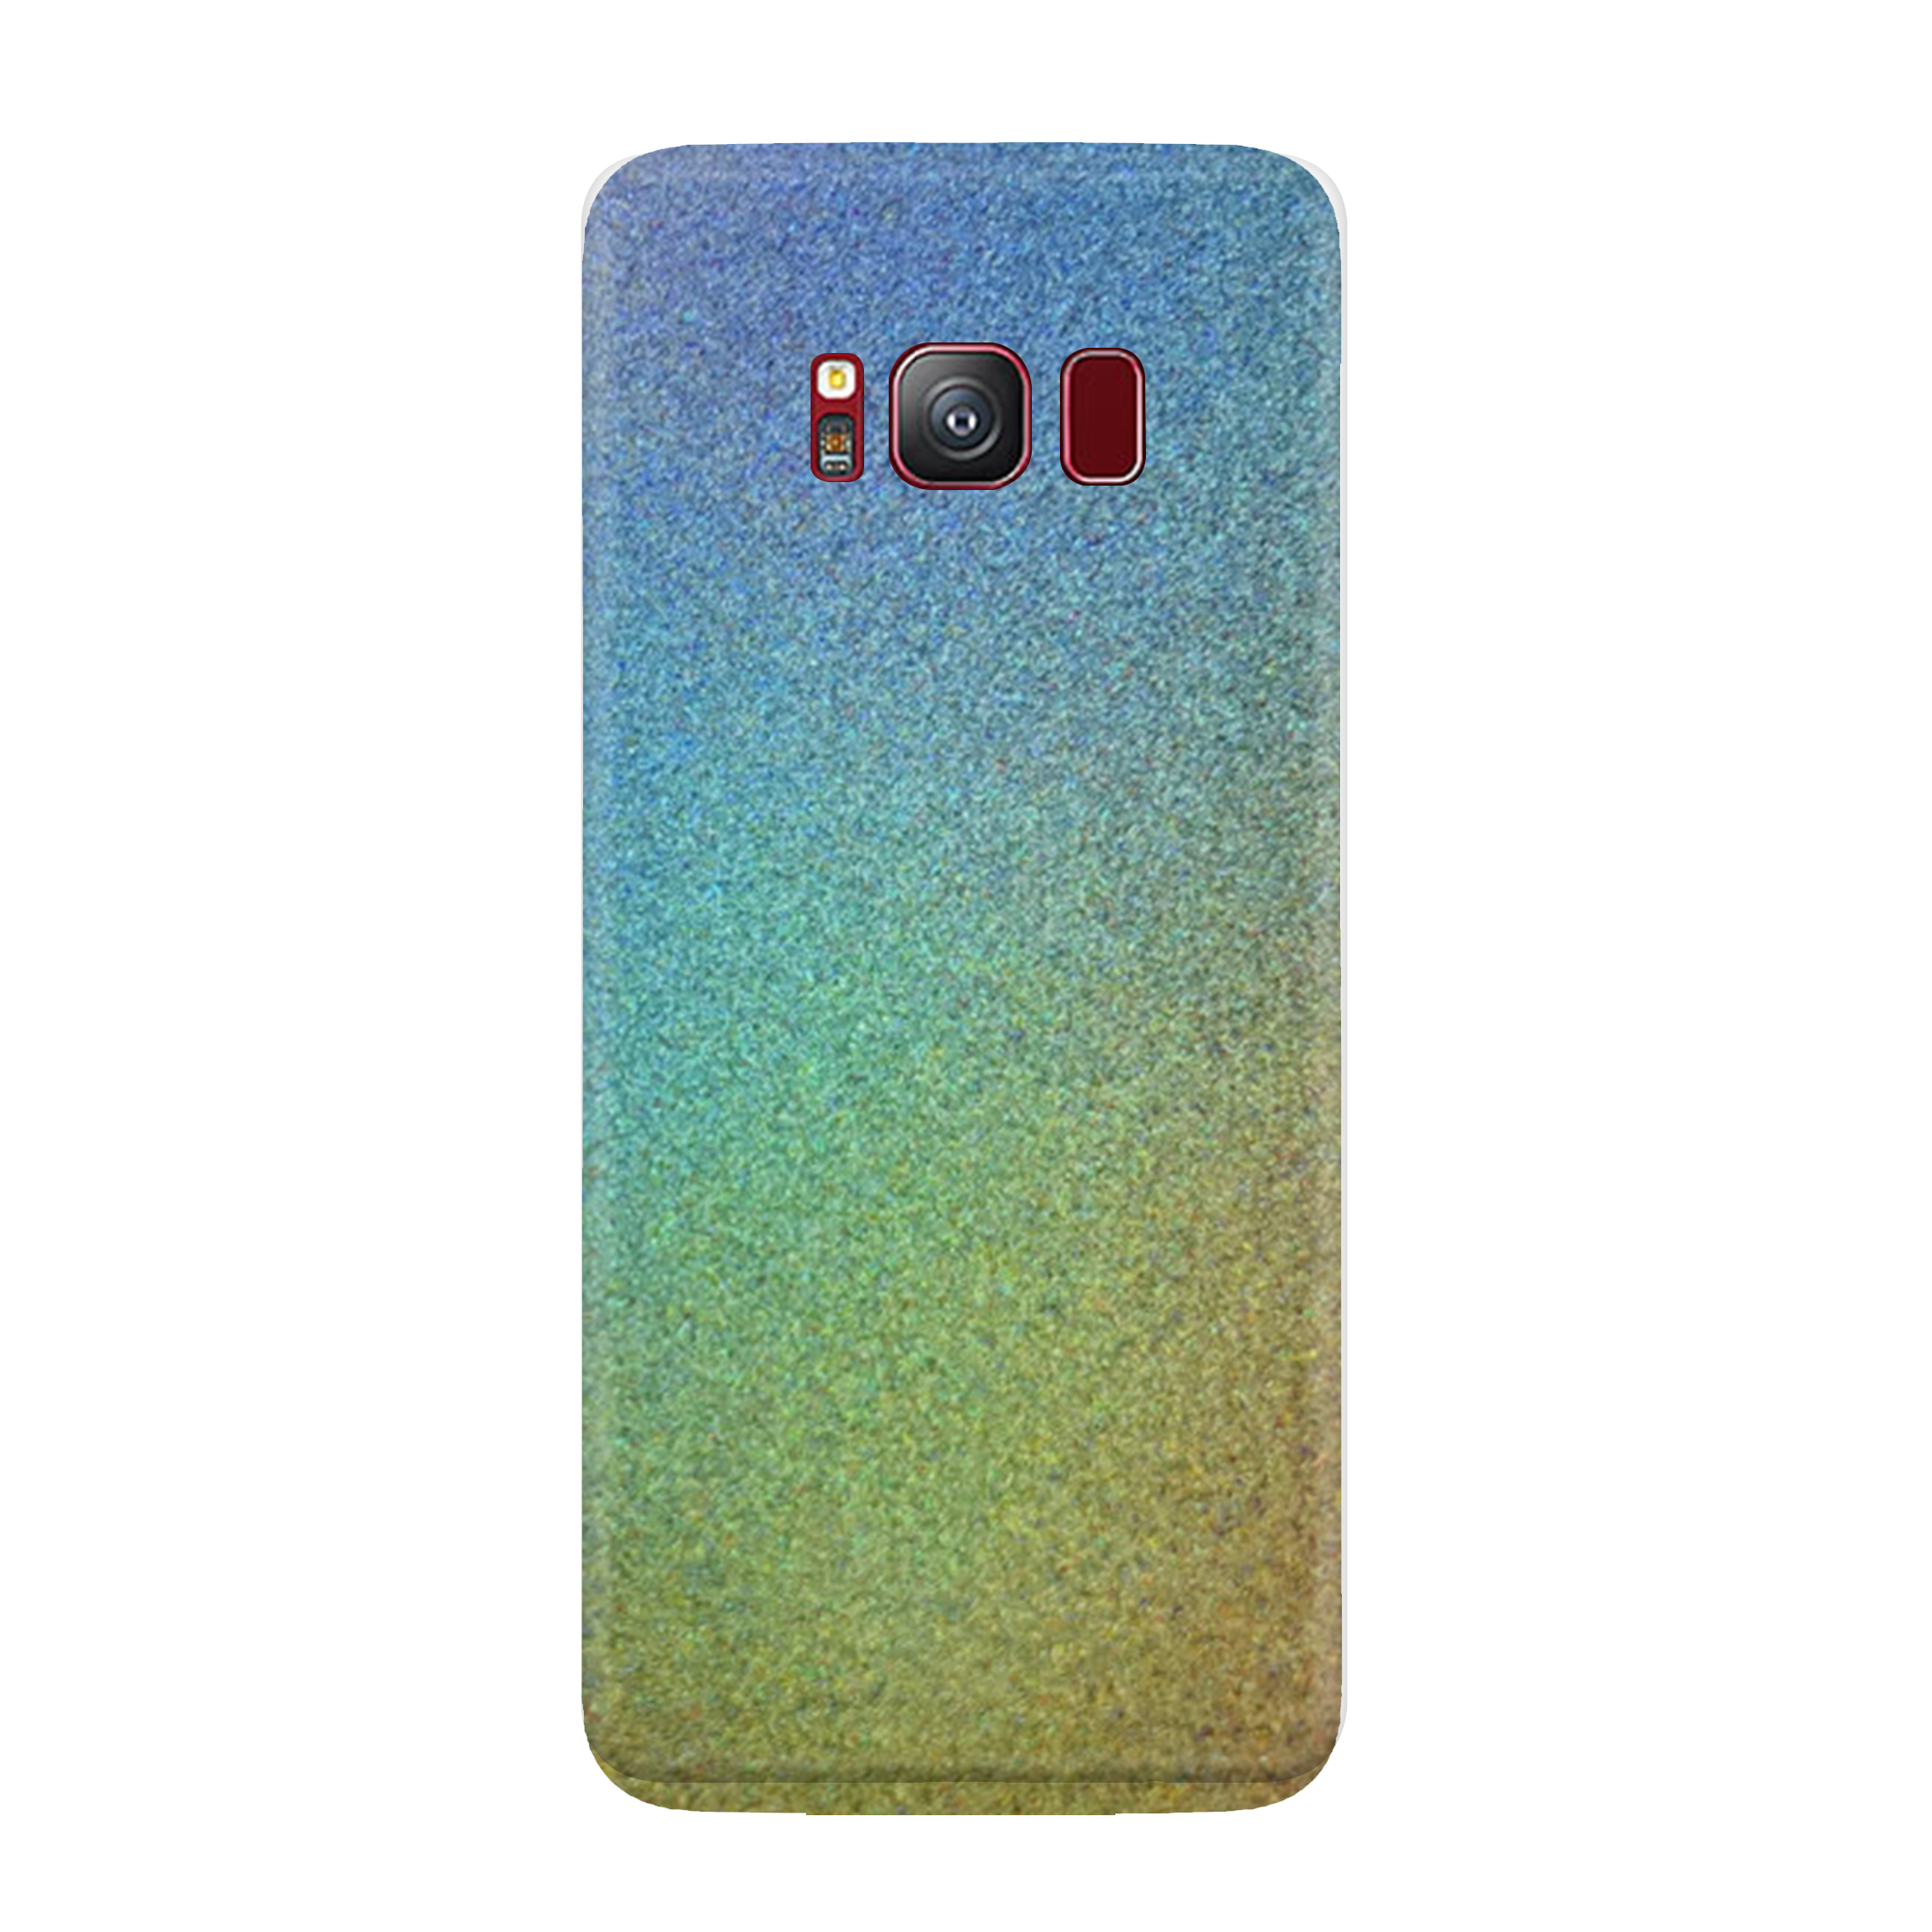 Gloss Flip Psychedelic Skin for Samsung S8 Plus